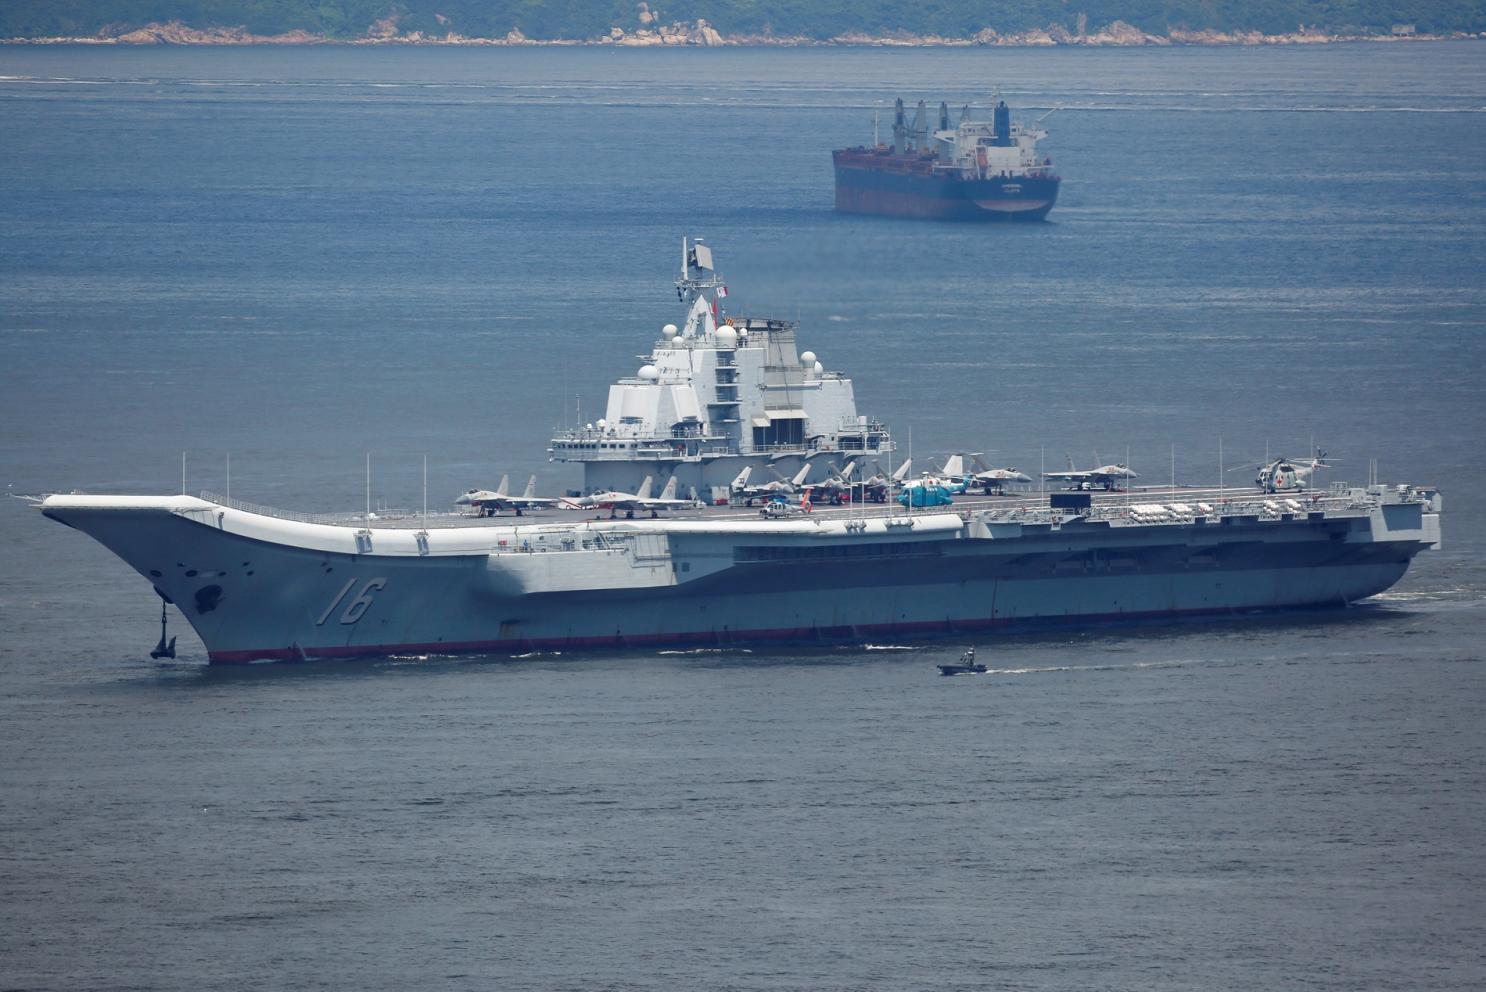 China plans to sell Pakistan an aircraft carrier